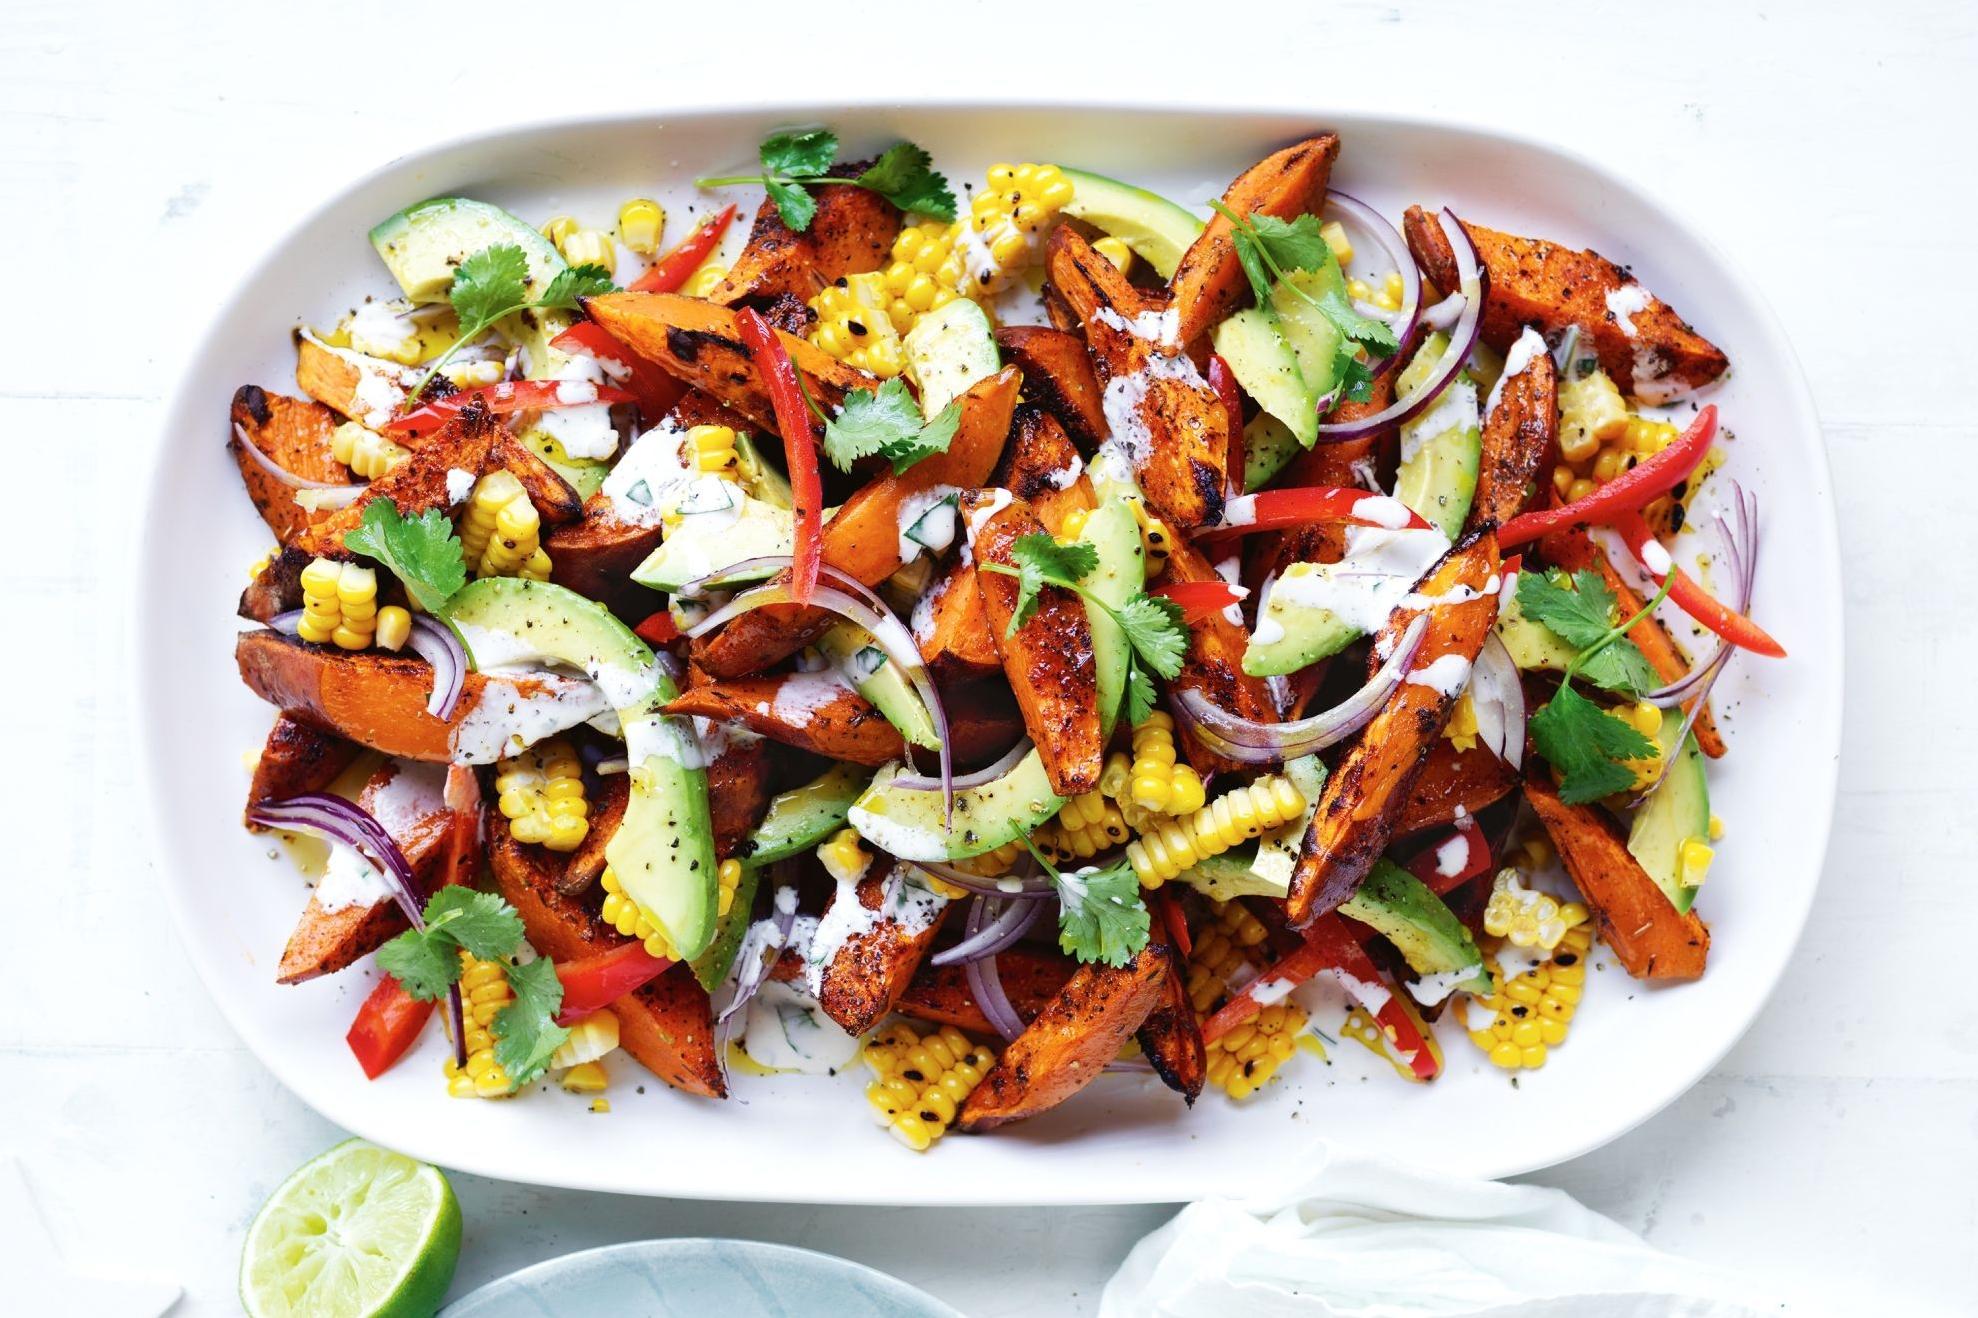  The vibrant colors of this slaw will brighten up any plate